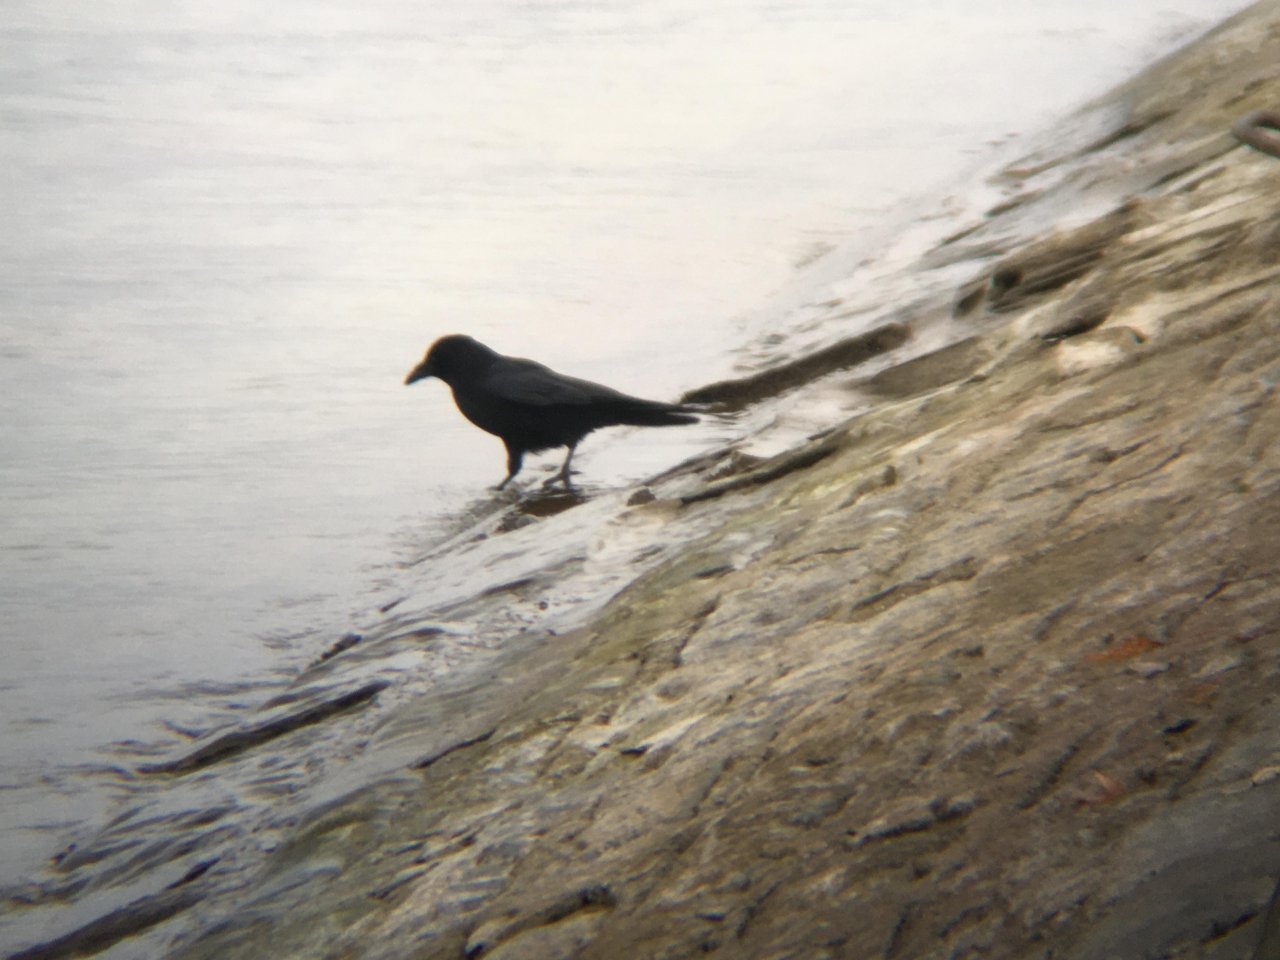 Carrion Crow in KraMobil App spotted by Andreas Ryser on 11.12.2020